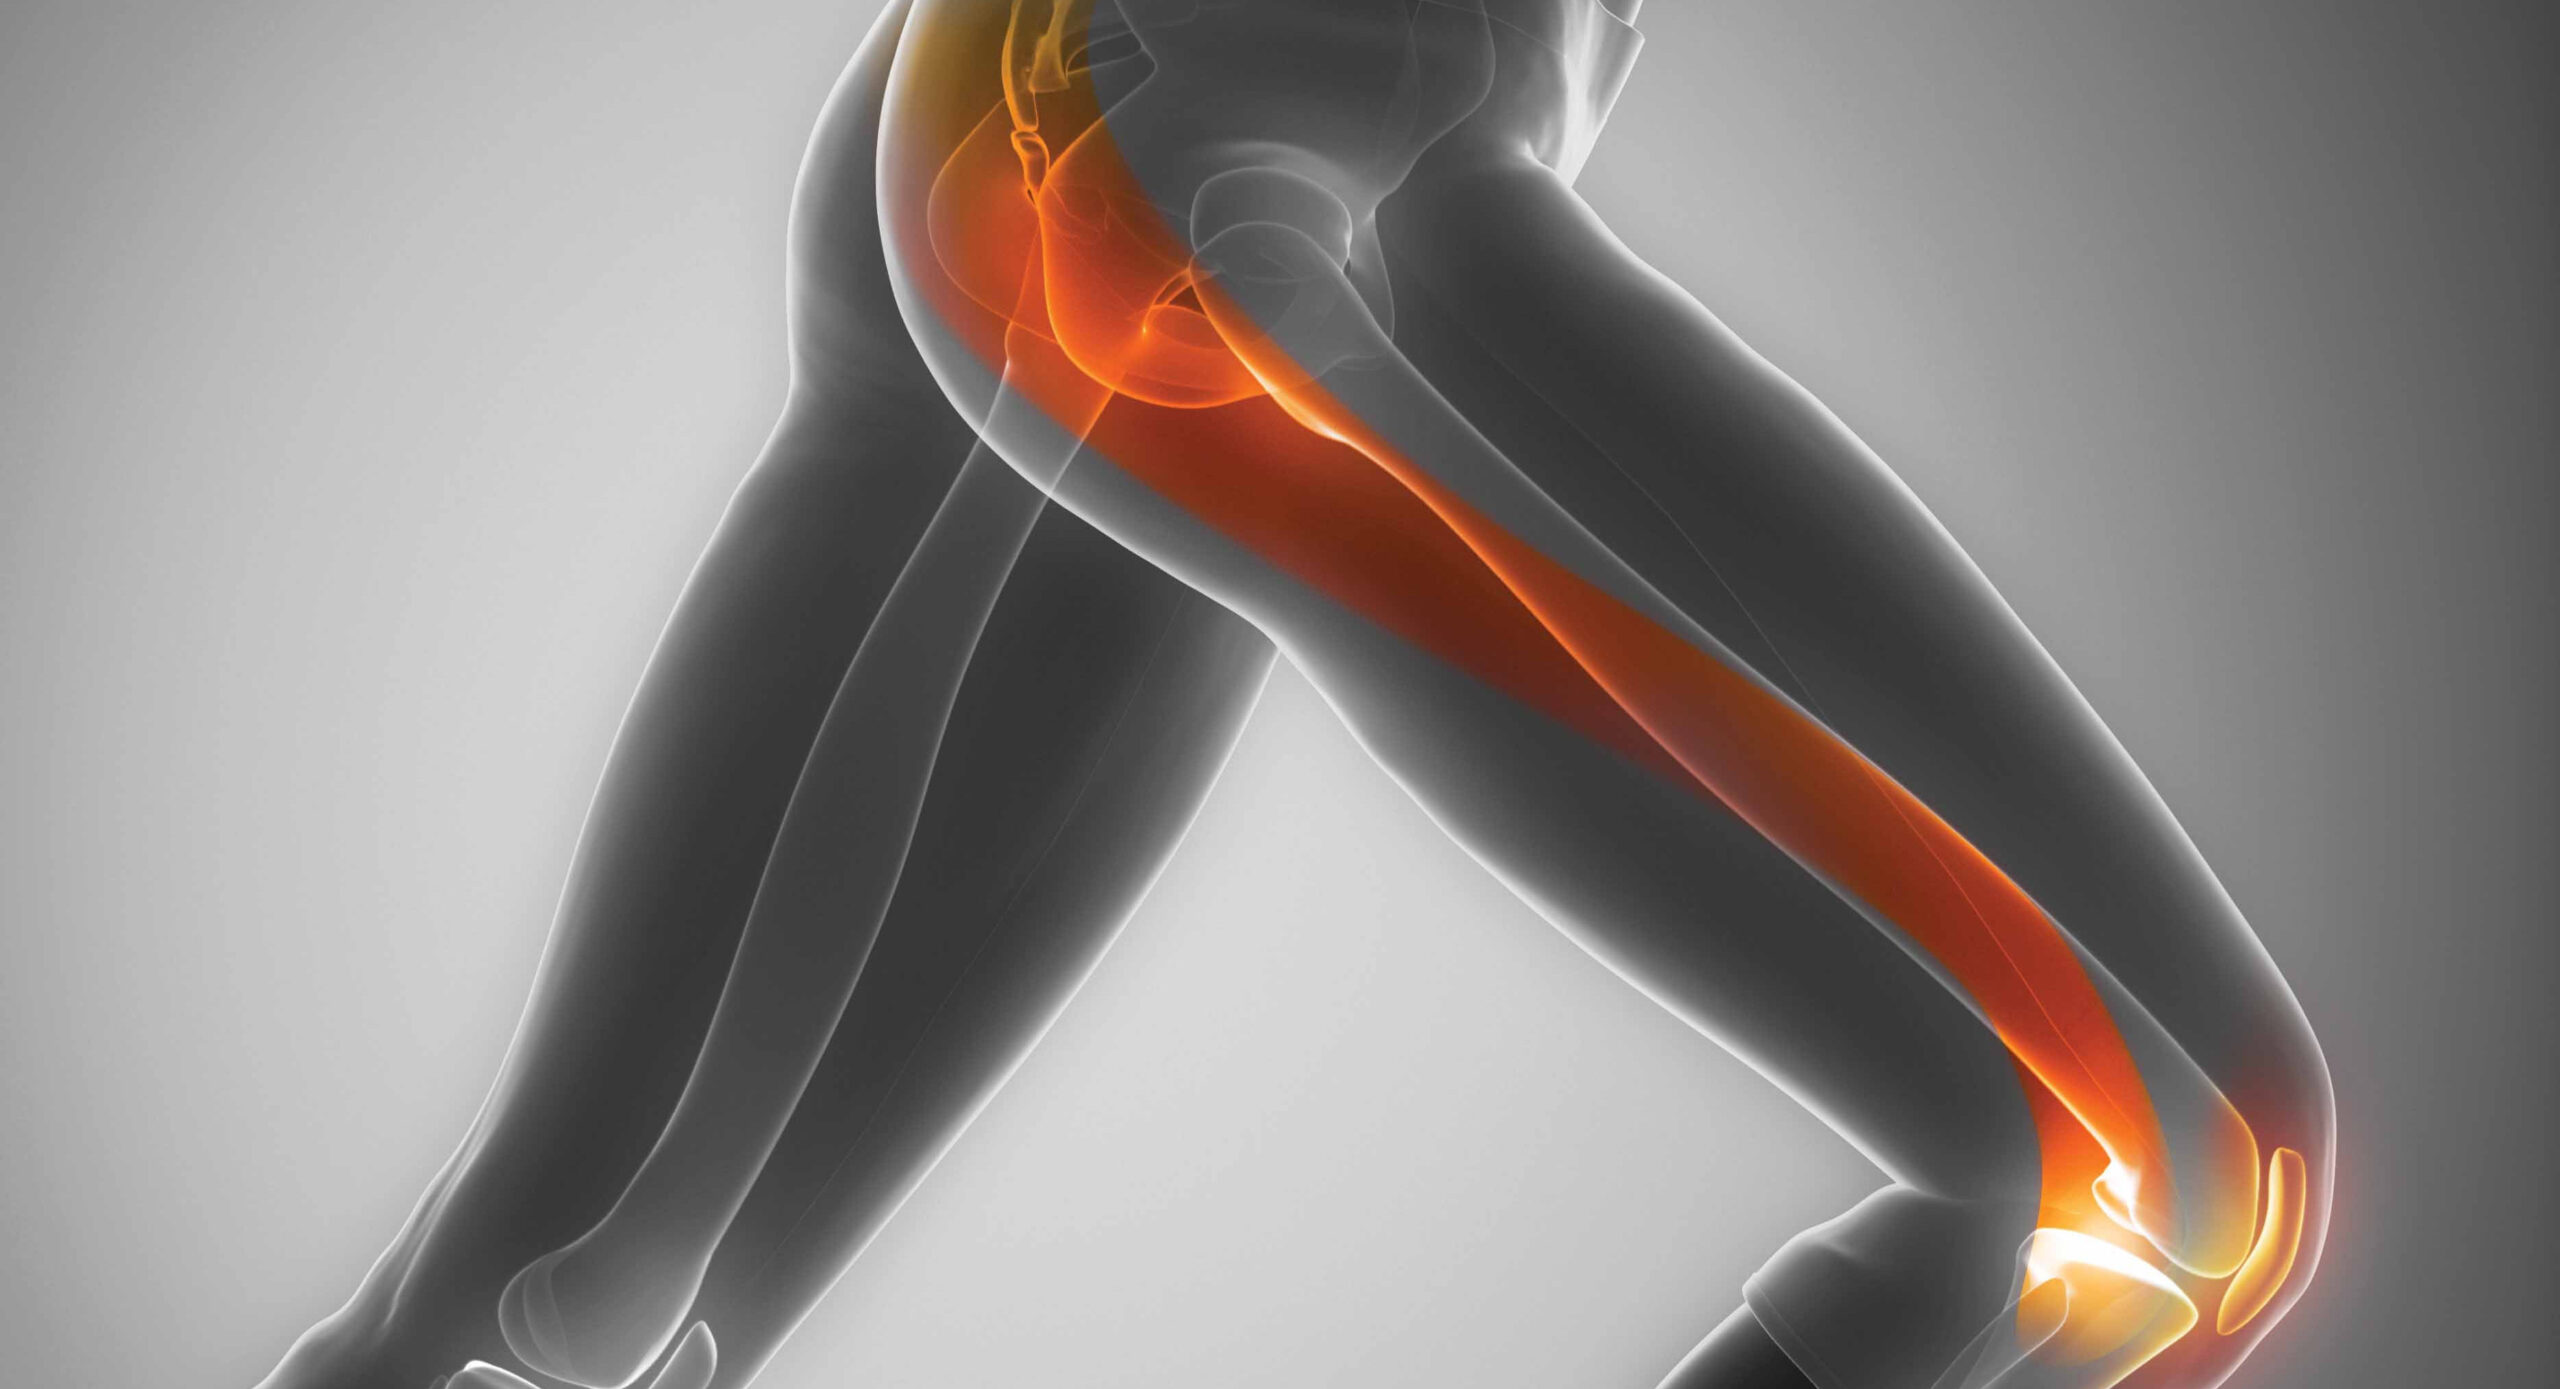 IT Band Pain In Hip - Why It Hurts And How To Fix It